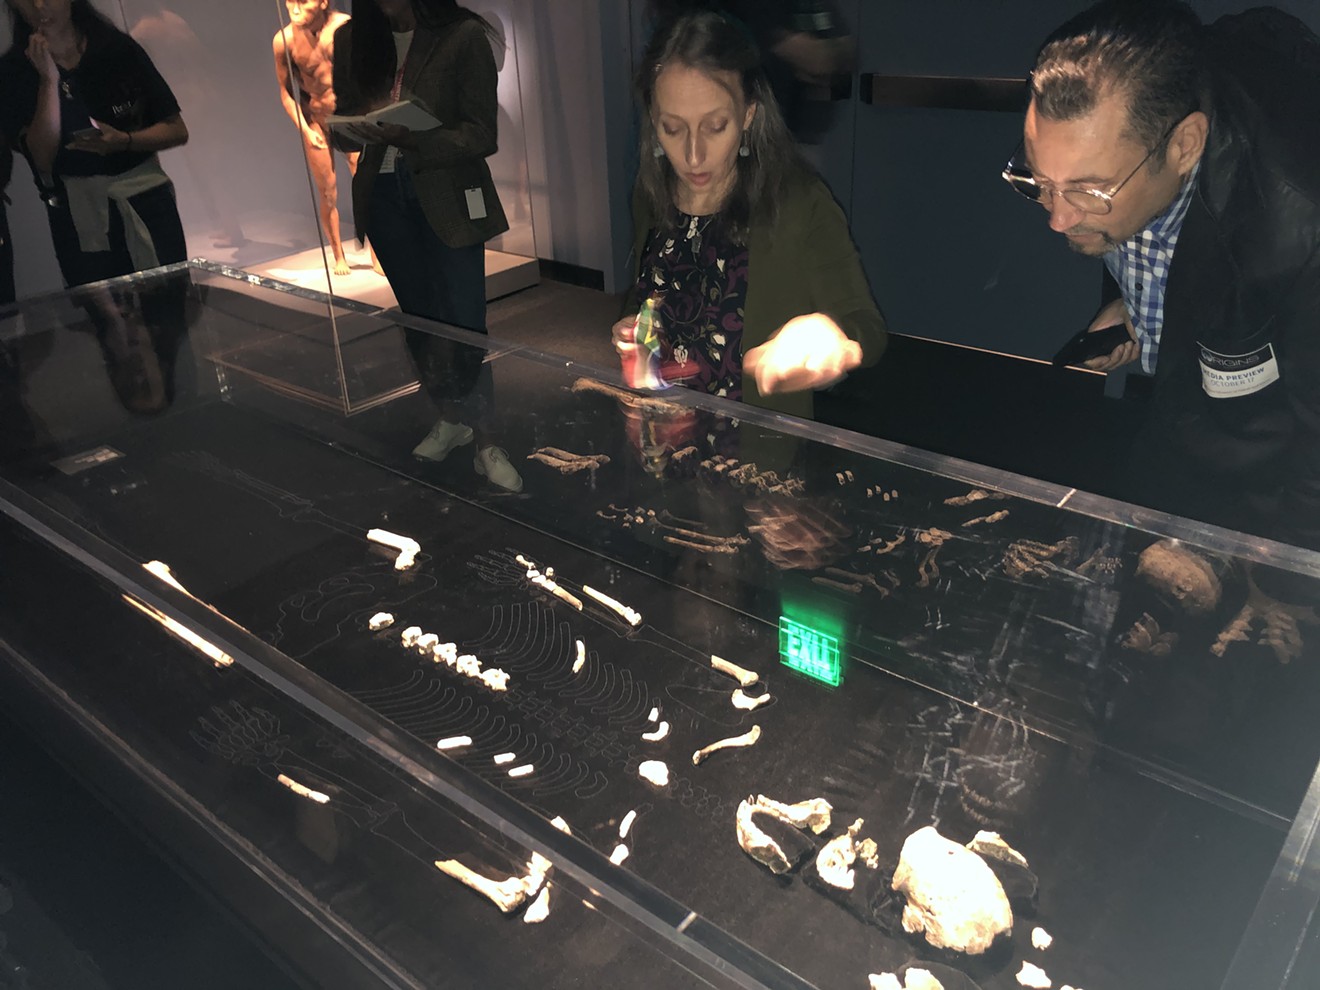 Dr. Becca Peixotto, an archaeologist and director of the Perot Museum's Center for the Exploration of the Human Journey, points out key details of the remains of Homo naledi, a newly discovered human ancestor that's one of two groundbreaking anthropological discoveries on display in a special exhibit at the Perot Museum of Nature and Science.